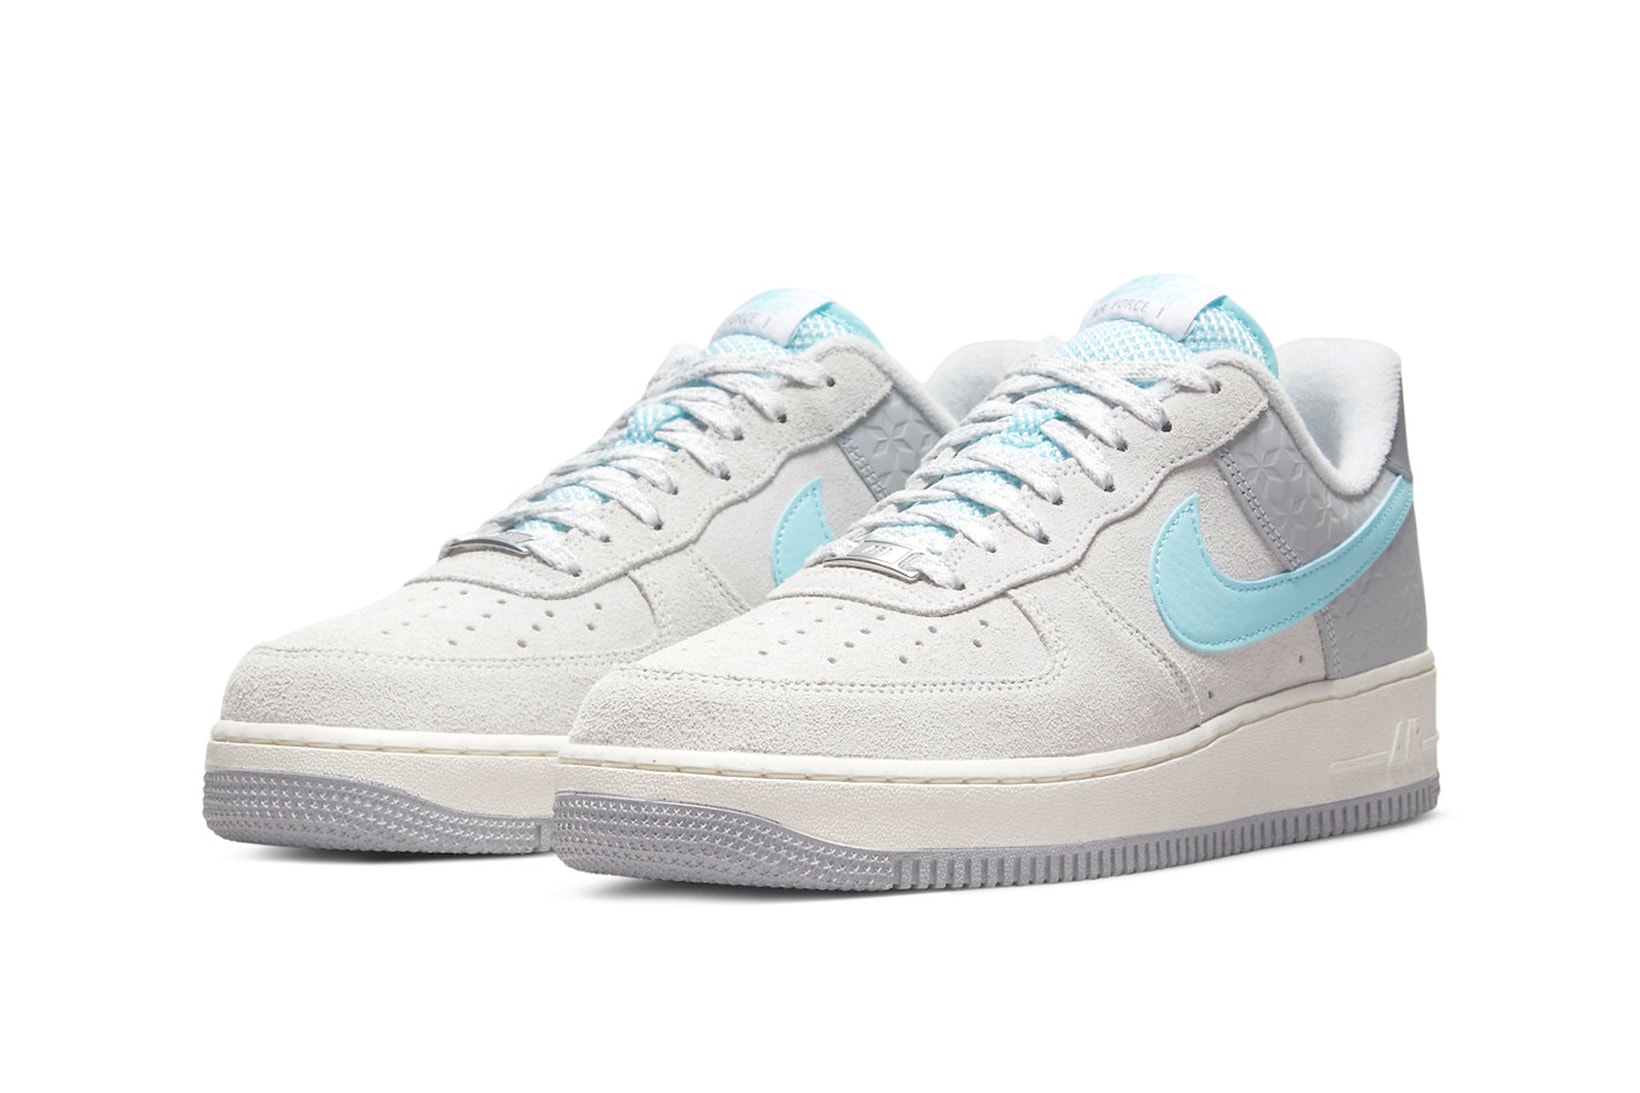 Nike Air Force 1 Low "Snowflake" Sneakers Blue White Gray Side View